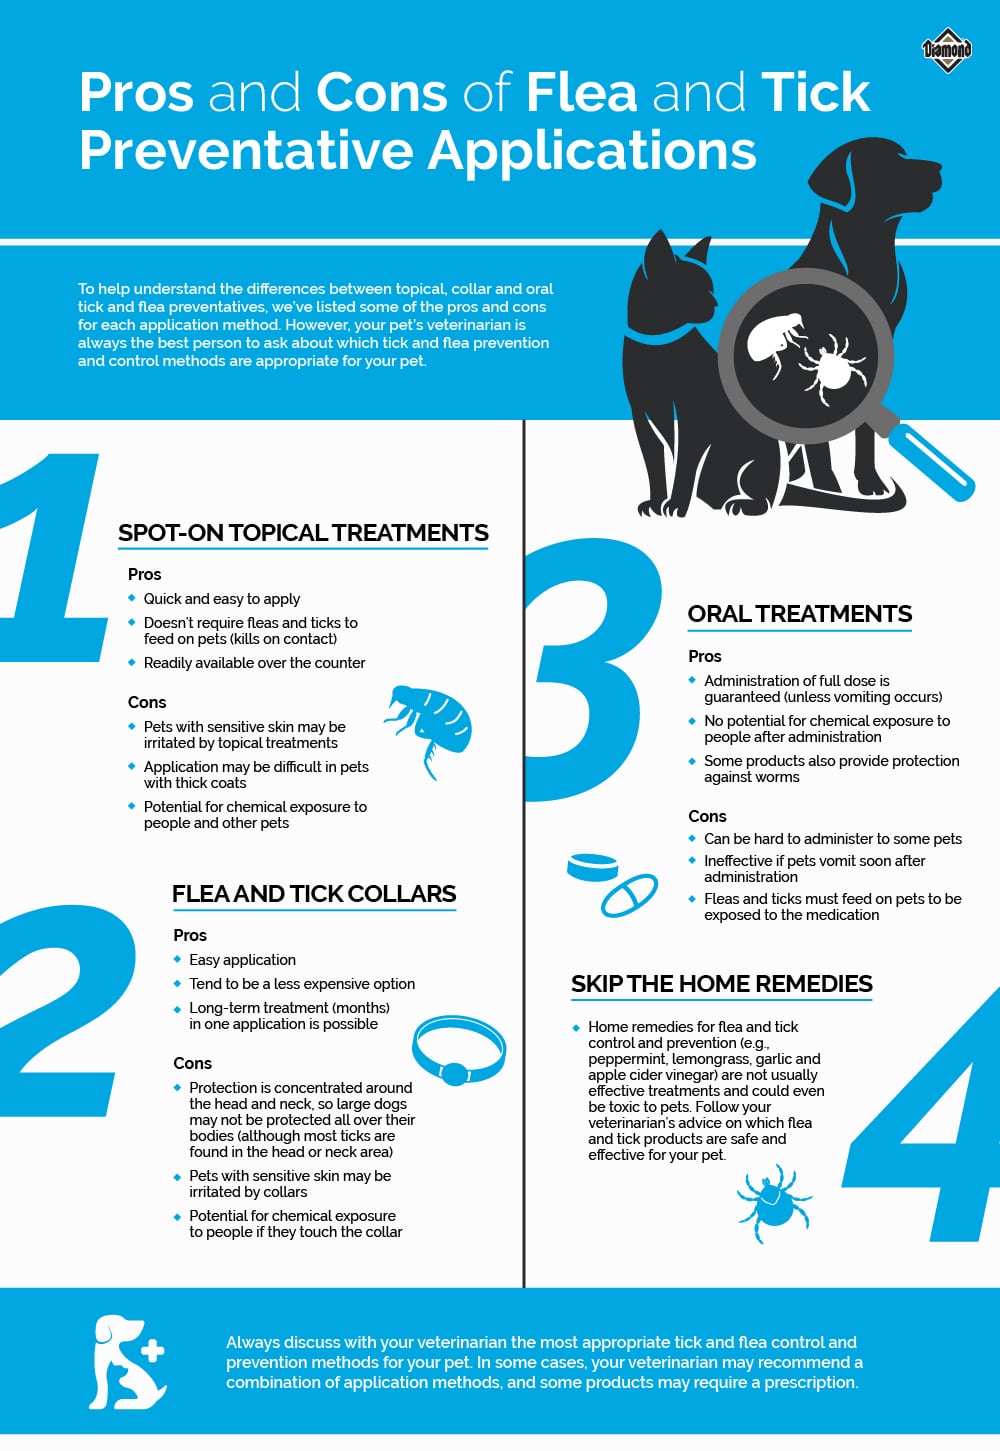 Pros and Cons of Flea and Tick Preventative Applications Infographic | Diamond Pet Foods